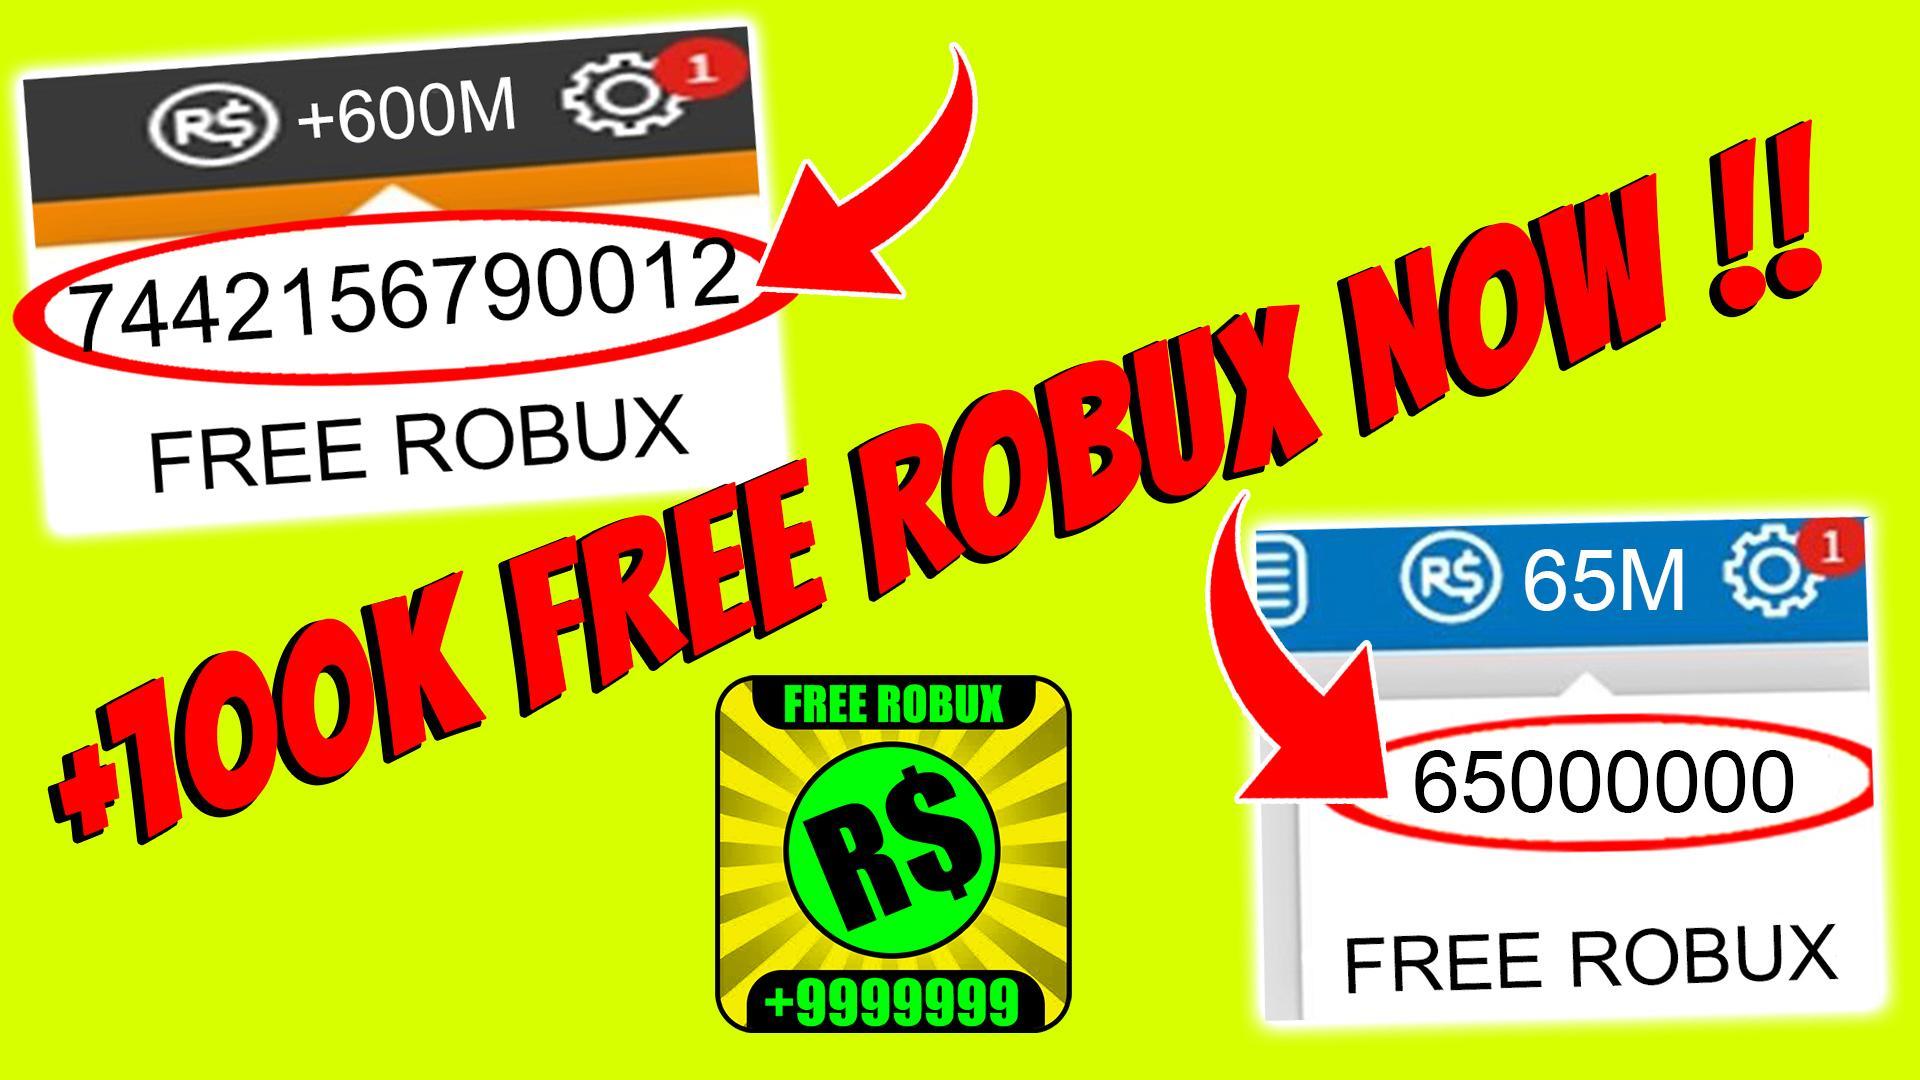 Unlimited Robux Tips For Android Apk Download - unlimited robux download